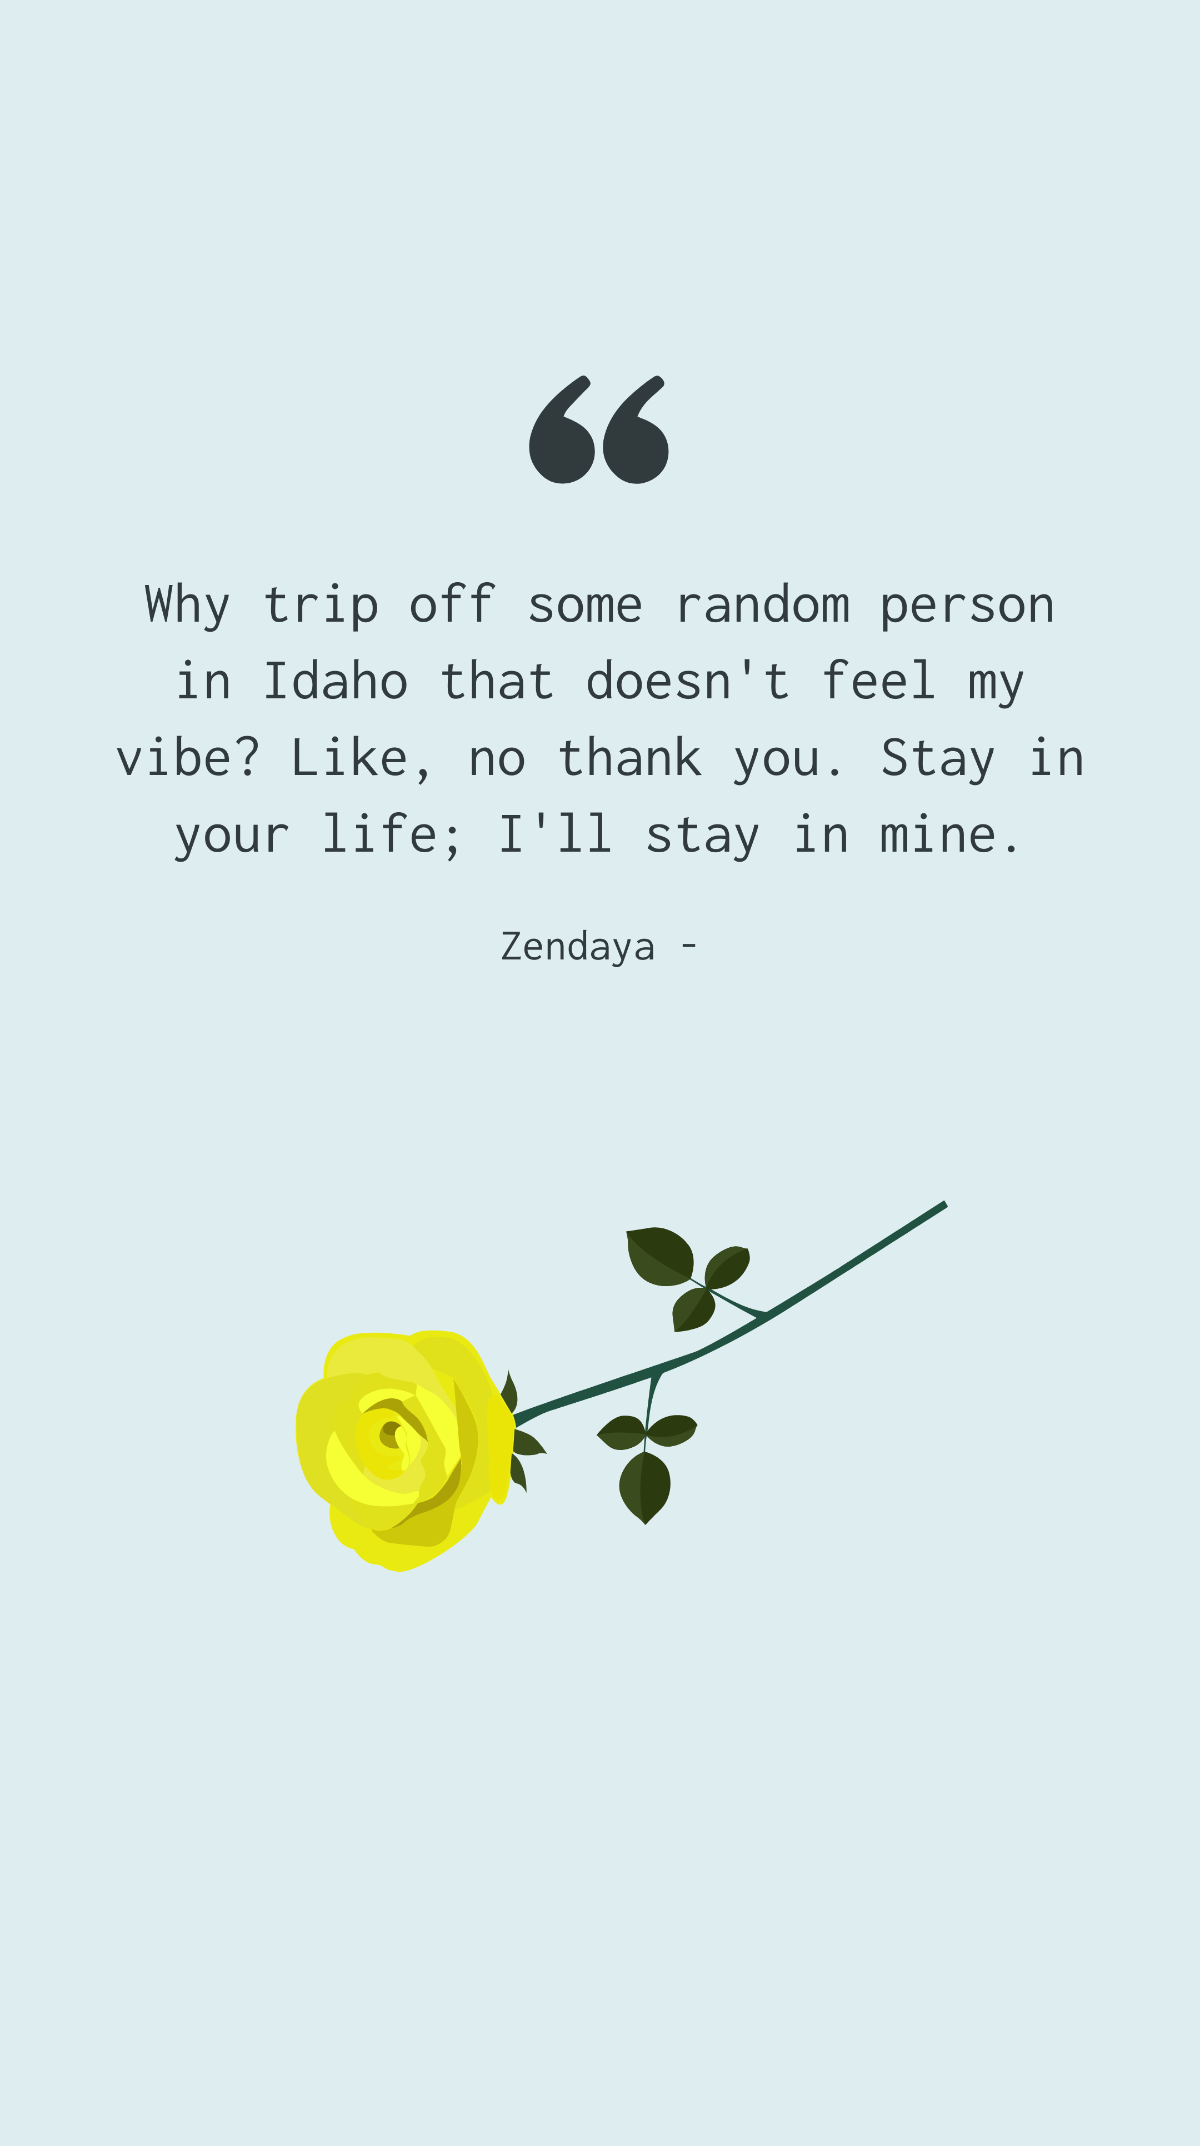 Zendaya - Why trip off some random person in Idaho that doesn't feel my vibe? Like, no thank you. Stay in your life; I'll stay in mine. Template